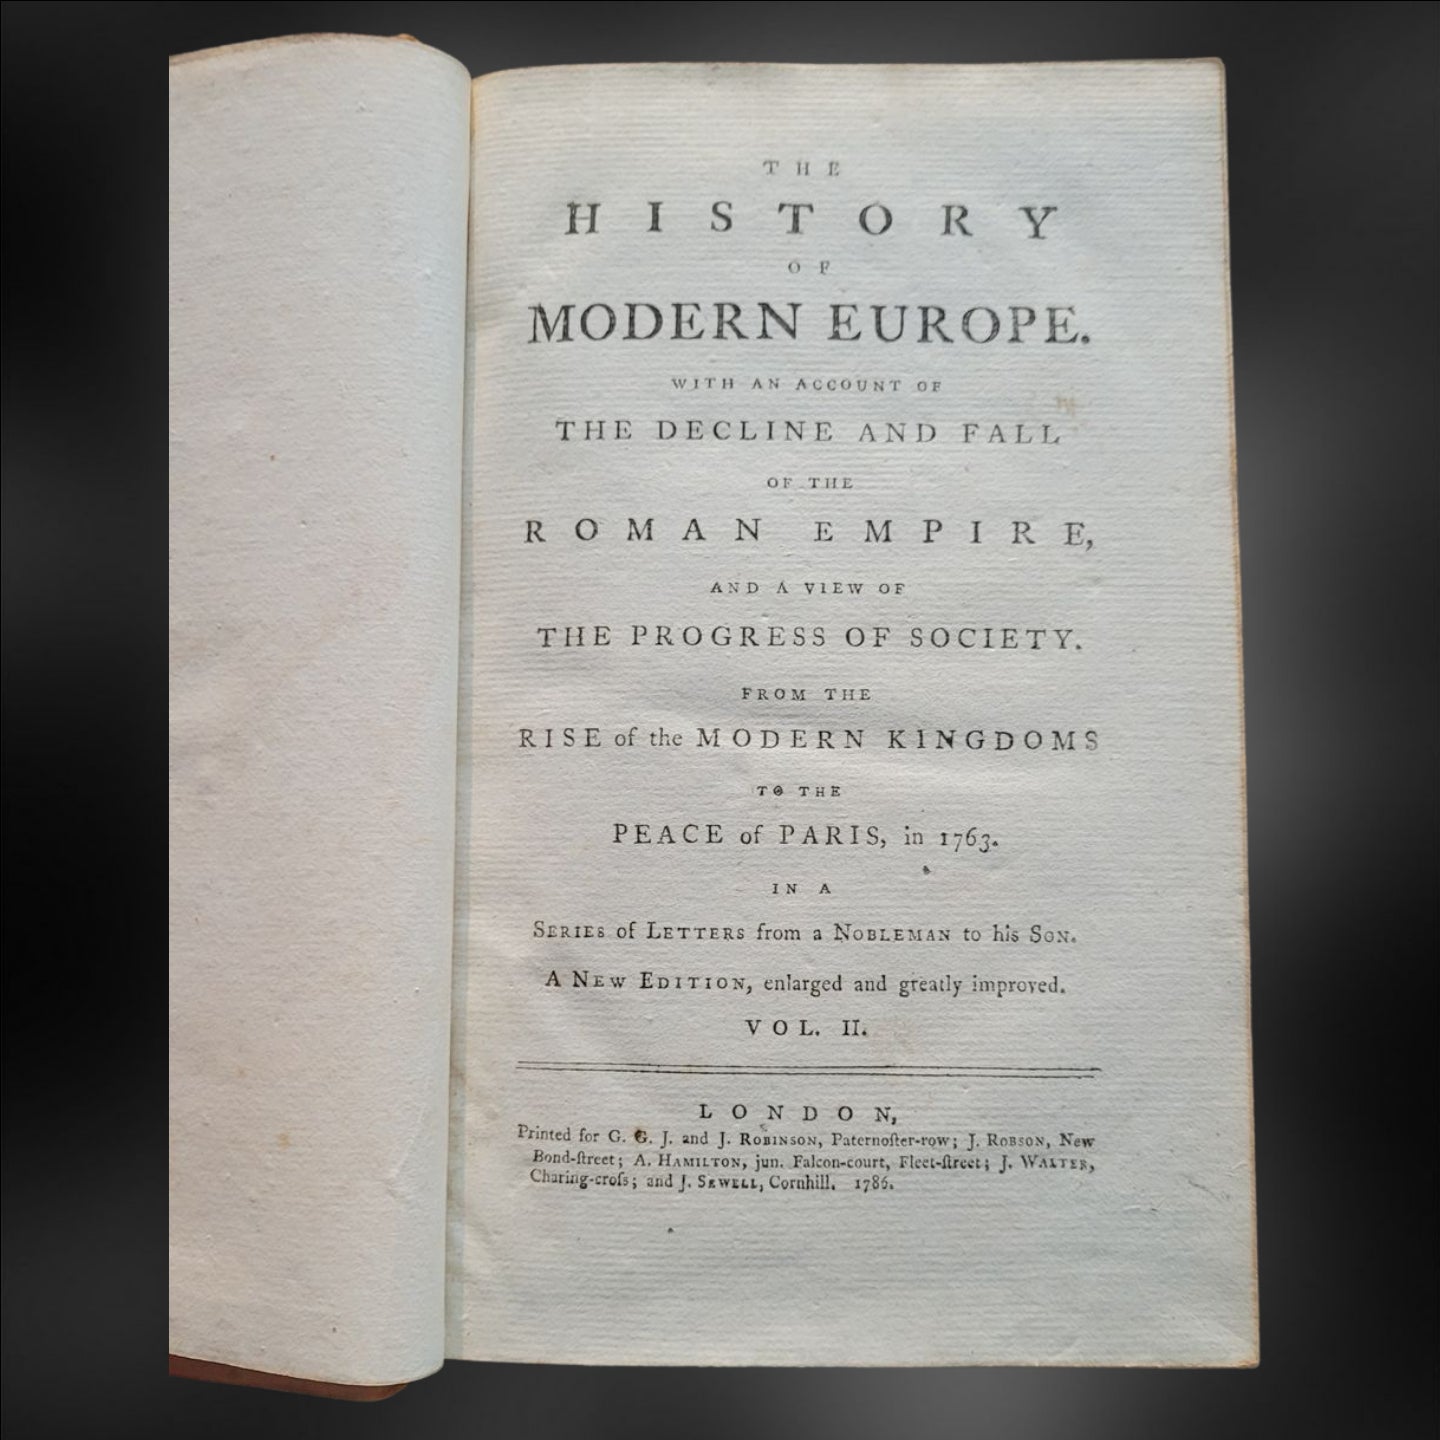 Book from Josiah Wedwood's Library